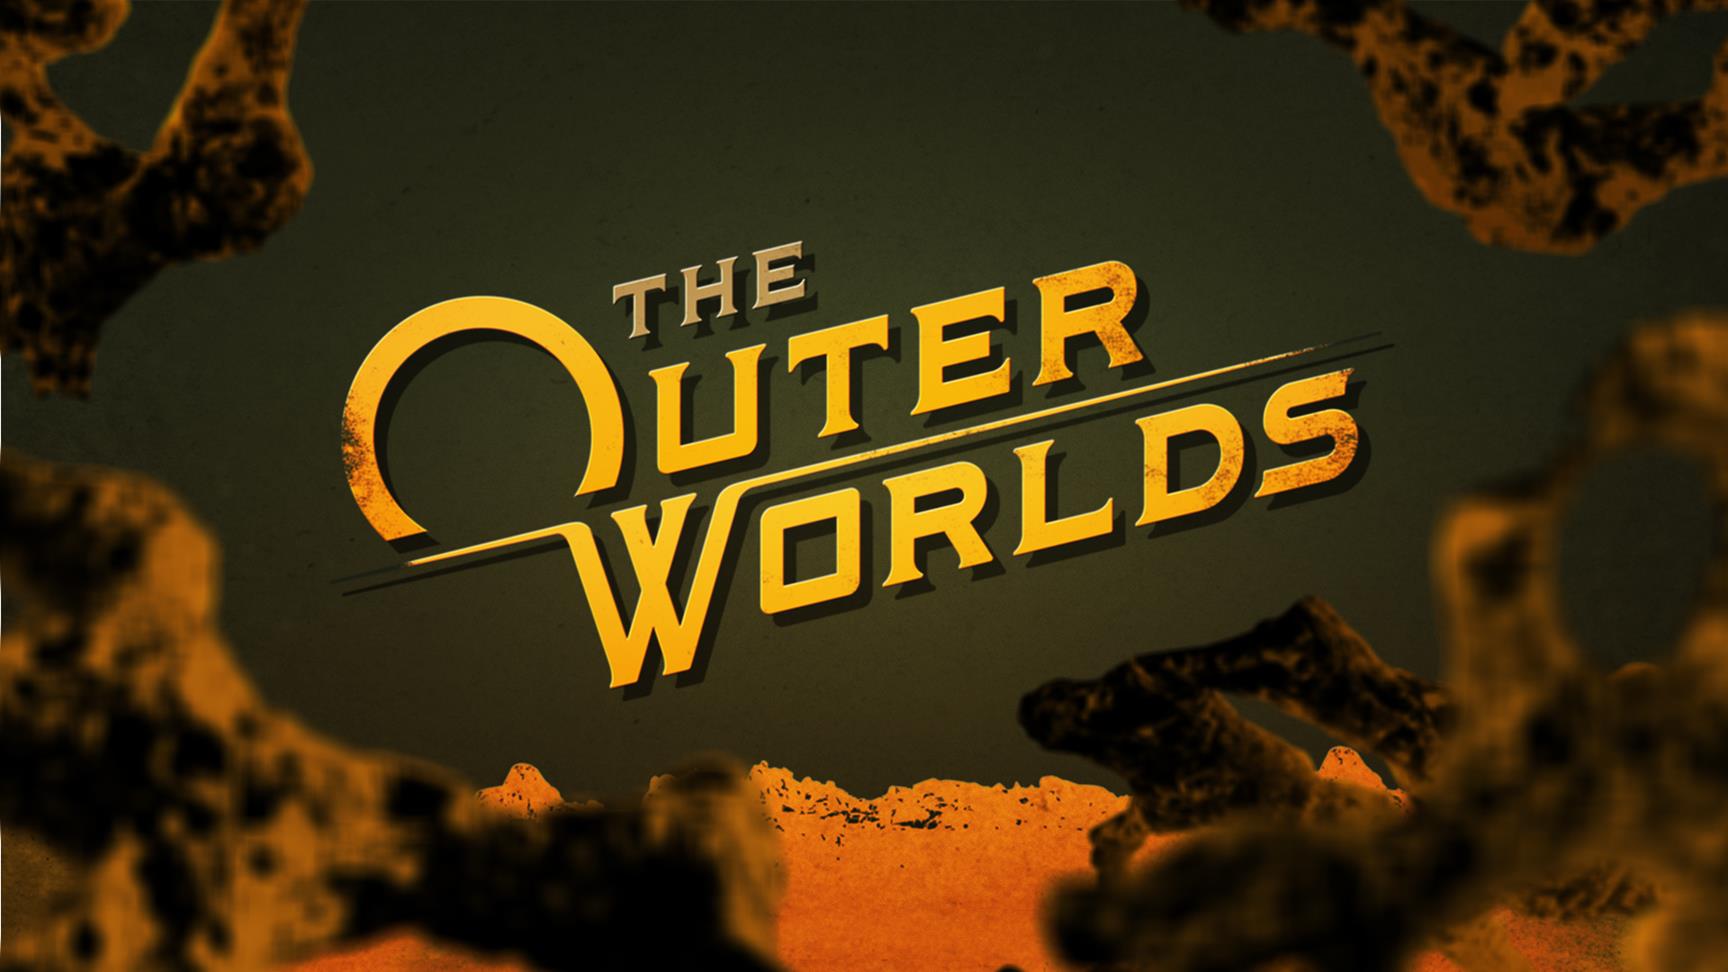 Image for The Outer Worlds' story has two major paths which decide some part of the ending